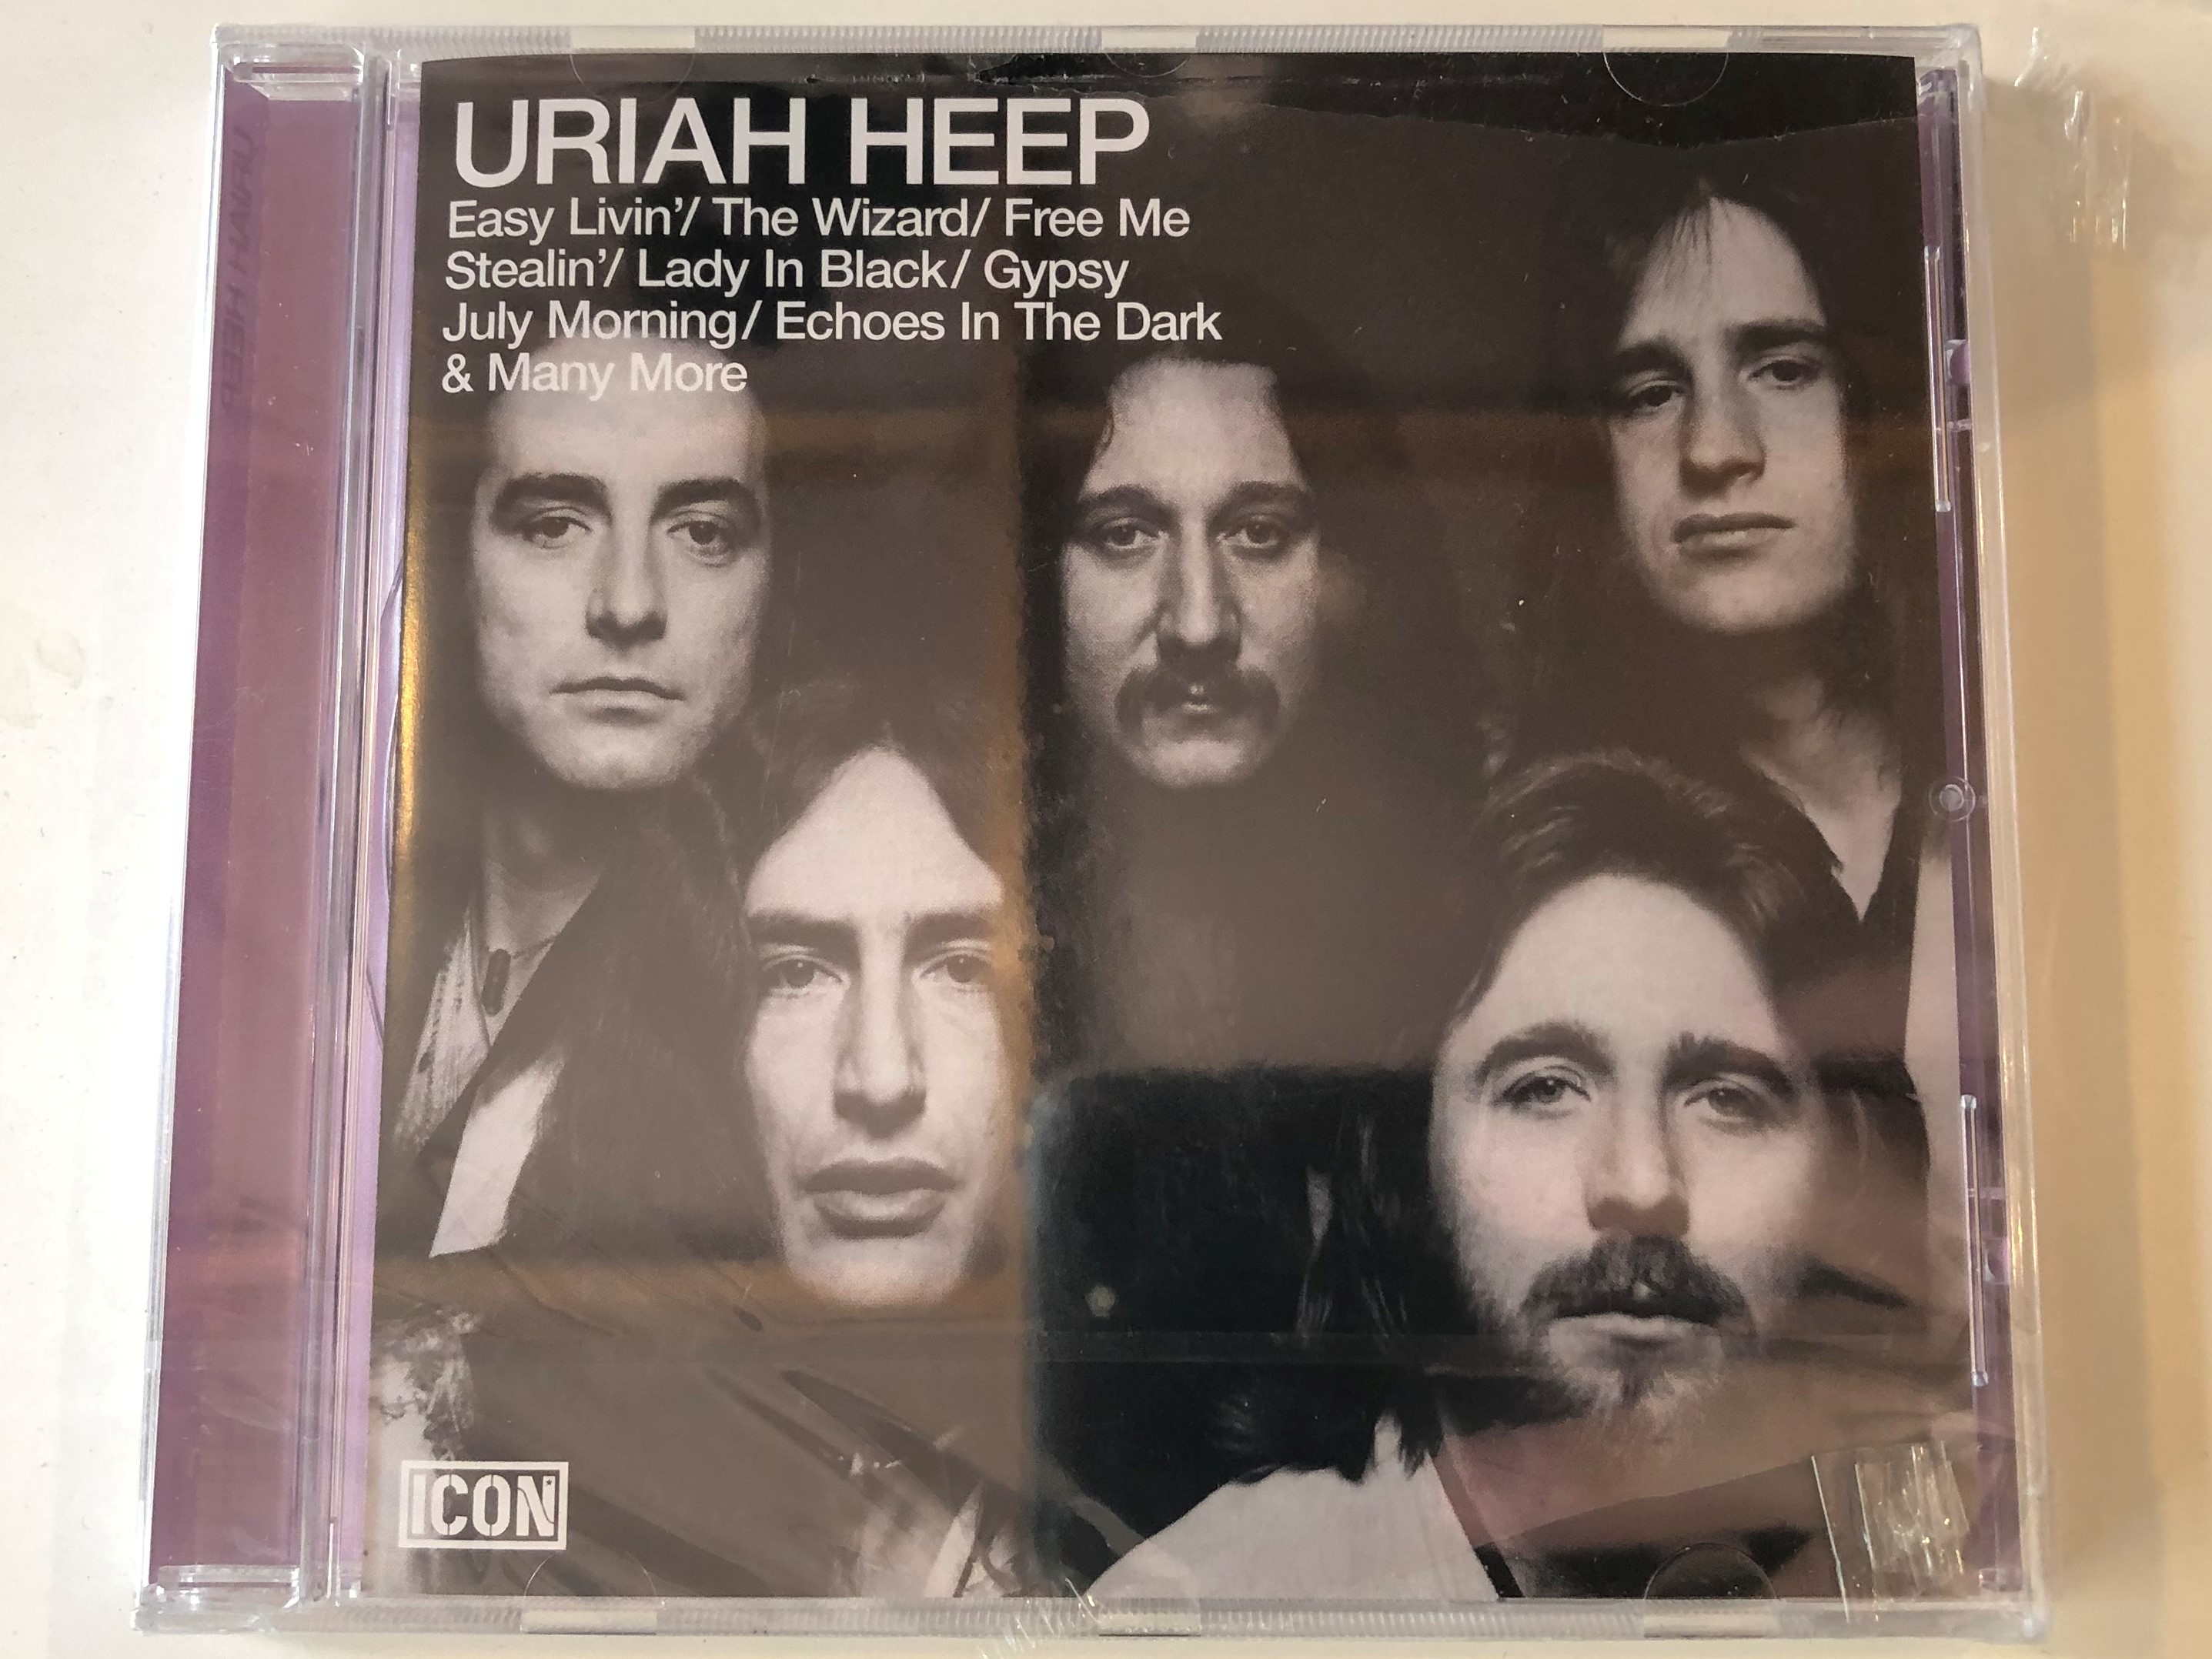 uriah-heep-easy-livin-the-wizard-free-me-stealin-lady-in-black-gypsy-july-morning-echoes-in-the-dark-many-more-icon-audio-cd-2012-0600753383926-1-.jpg